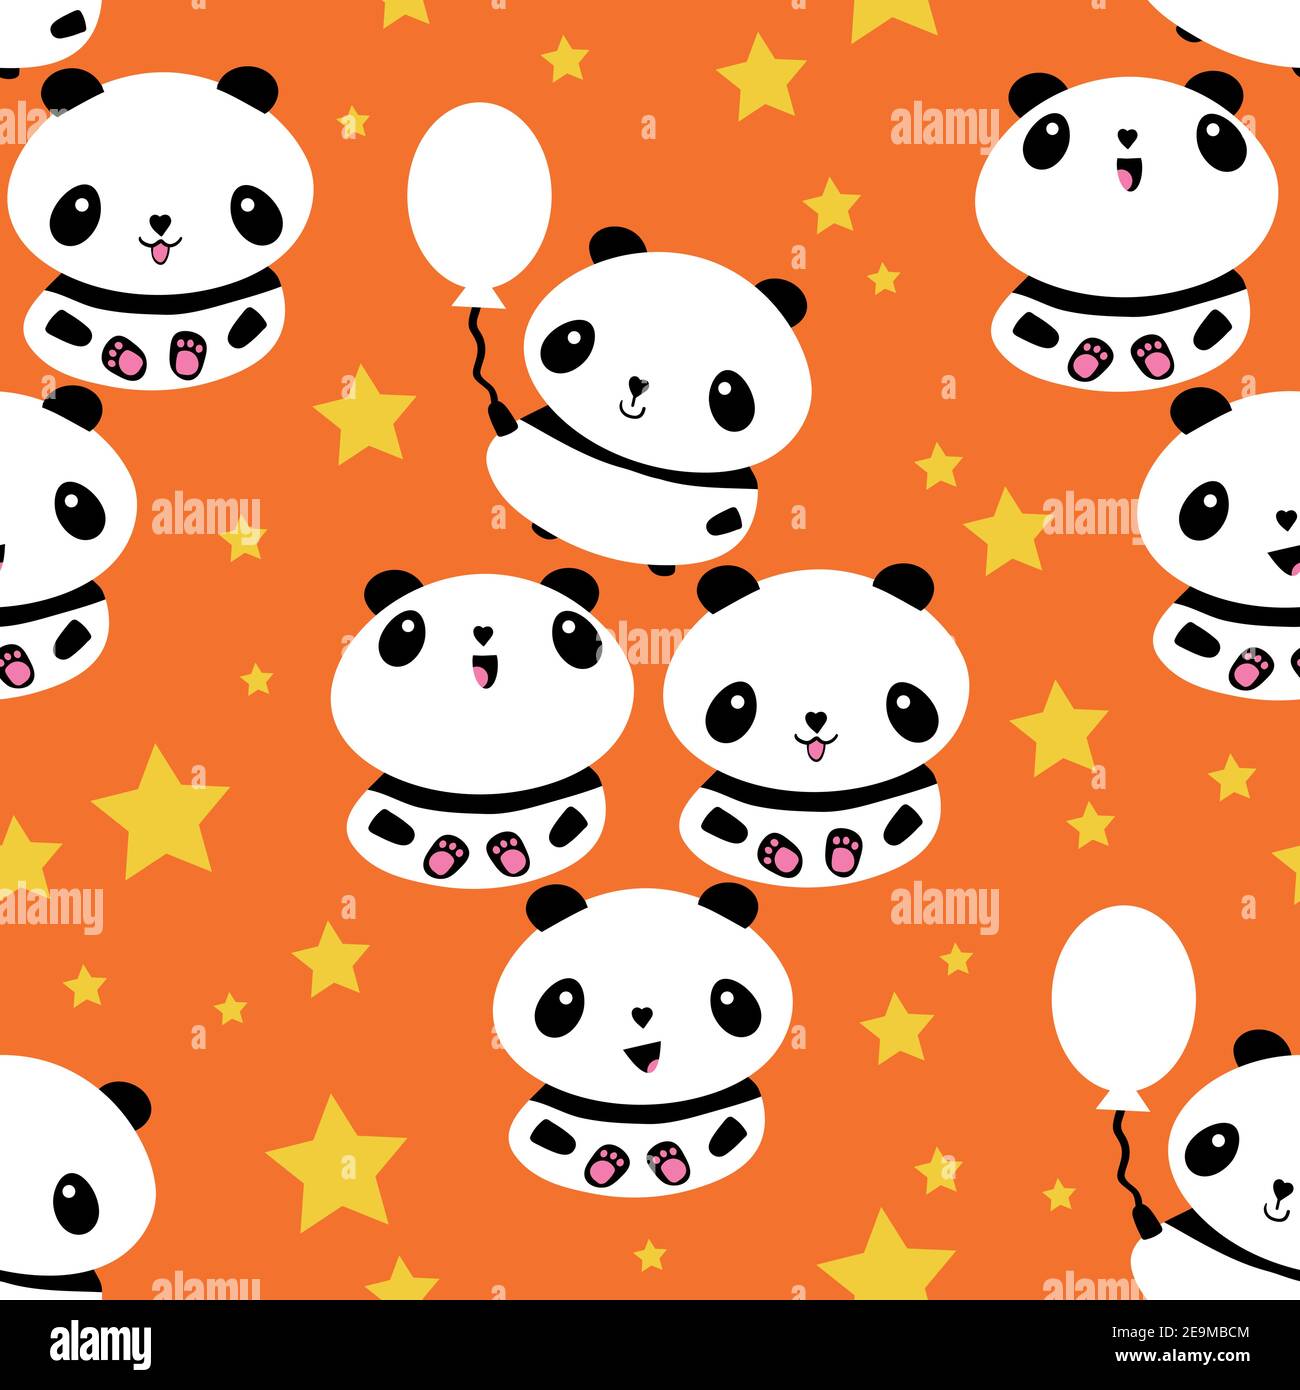 Kawaii vector panda seamless pattern pattern background. Cute black and white sitting cartoon bears with balloons and stars on orange backdrop Stock Vector